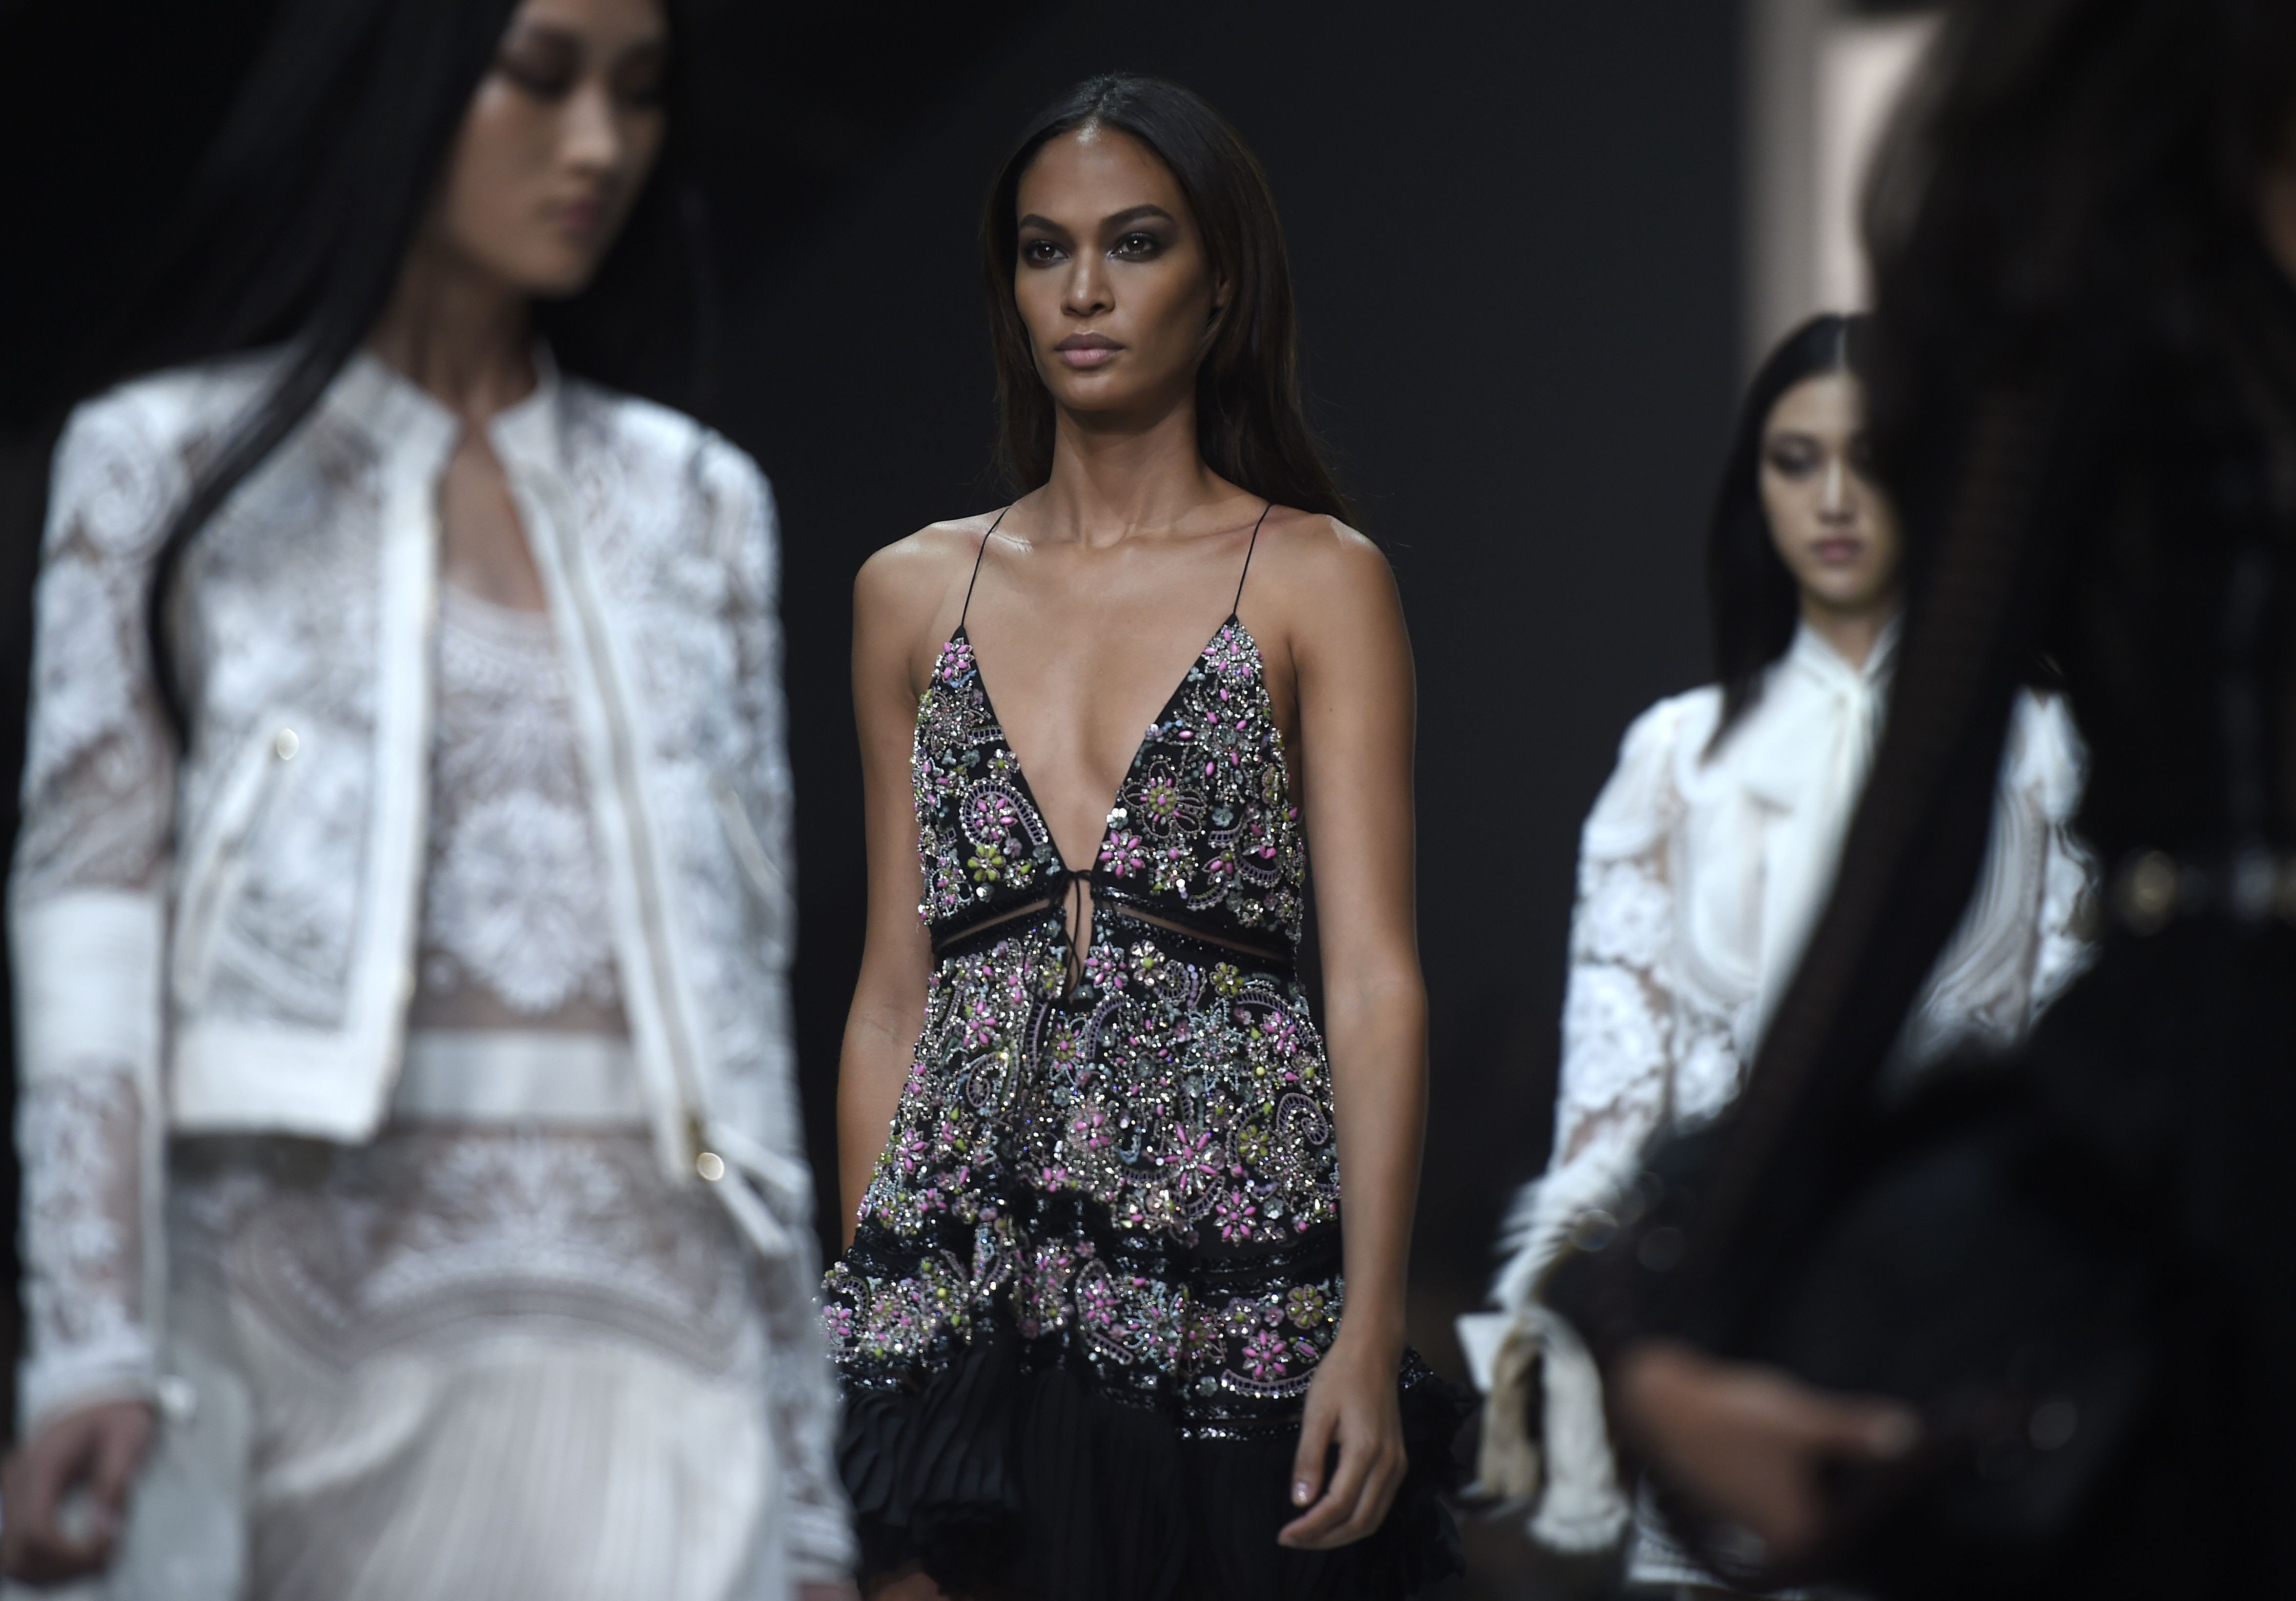 Puerto Rican model Joan Smalls was in fashion’s diversity spotlight when she became Estée Lauder’s first Latina “spokesmodel”. Photo: AFP